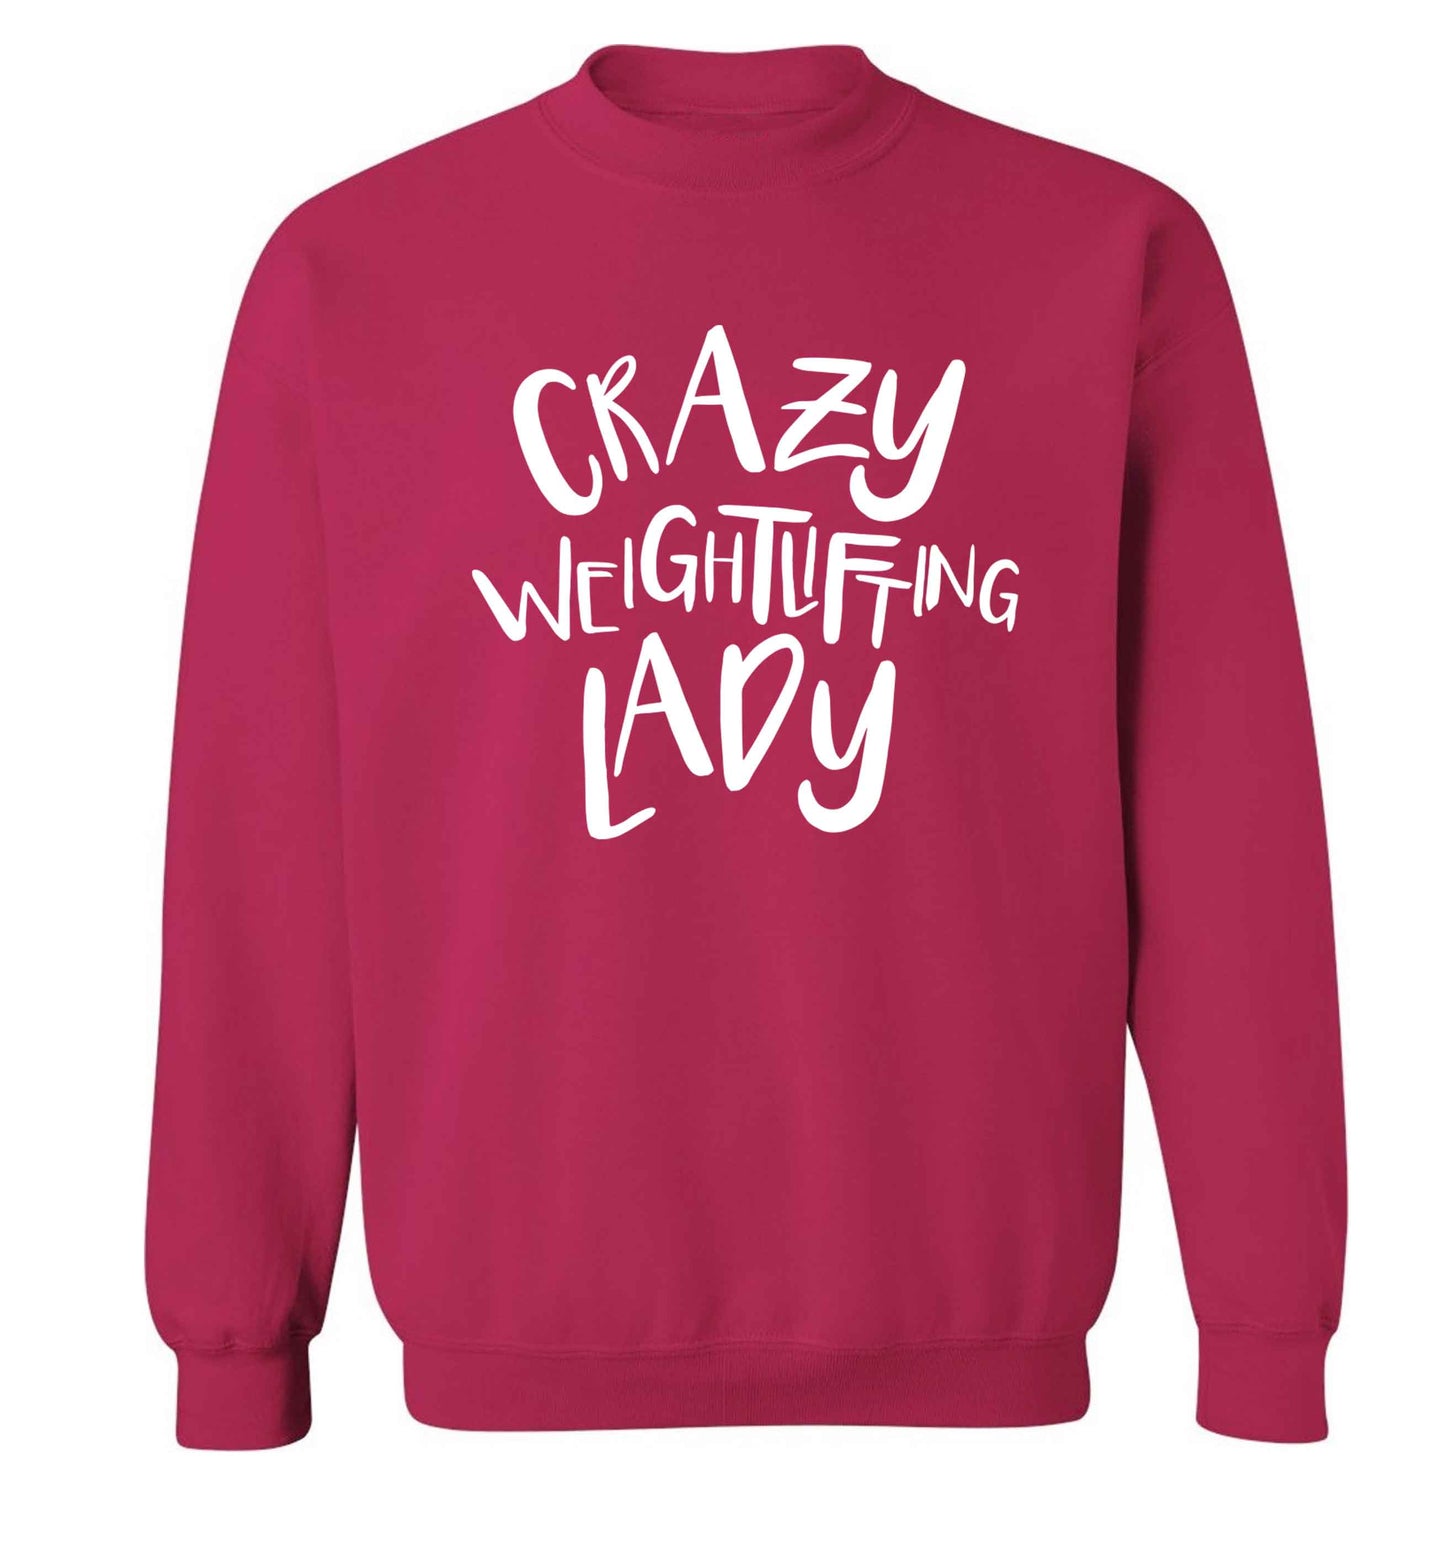 Crazy weightlifting lady Adult's unisex pink Sweater 2XL